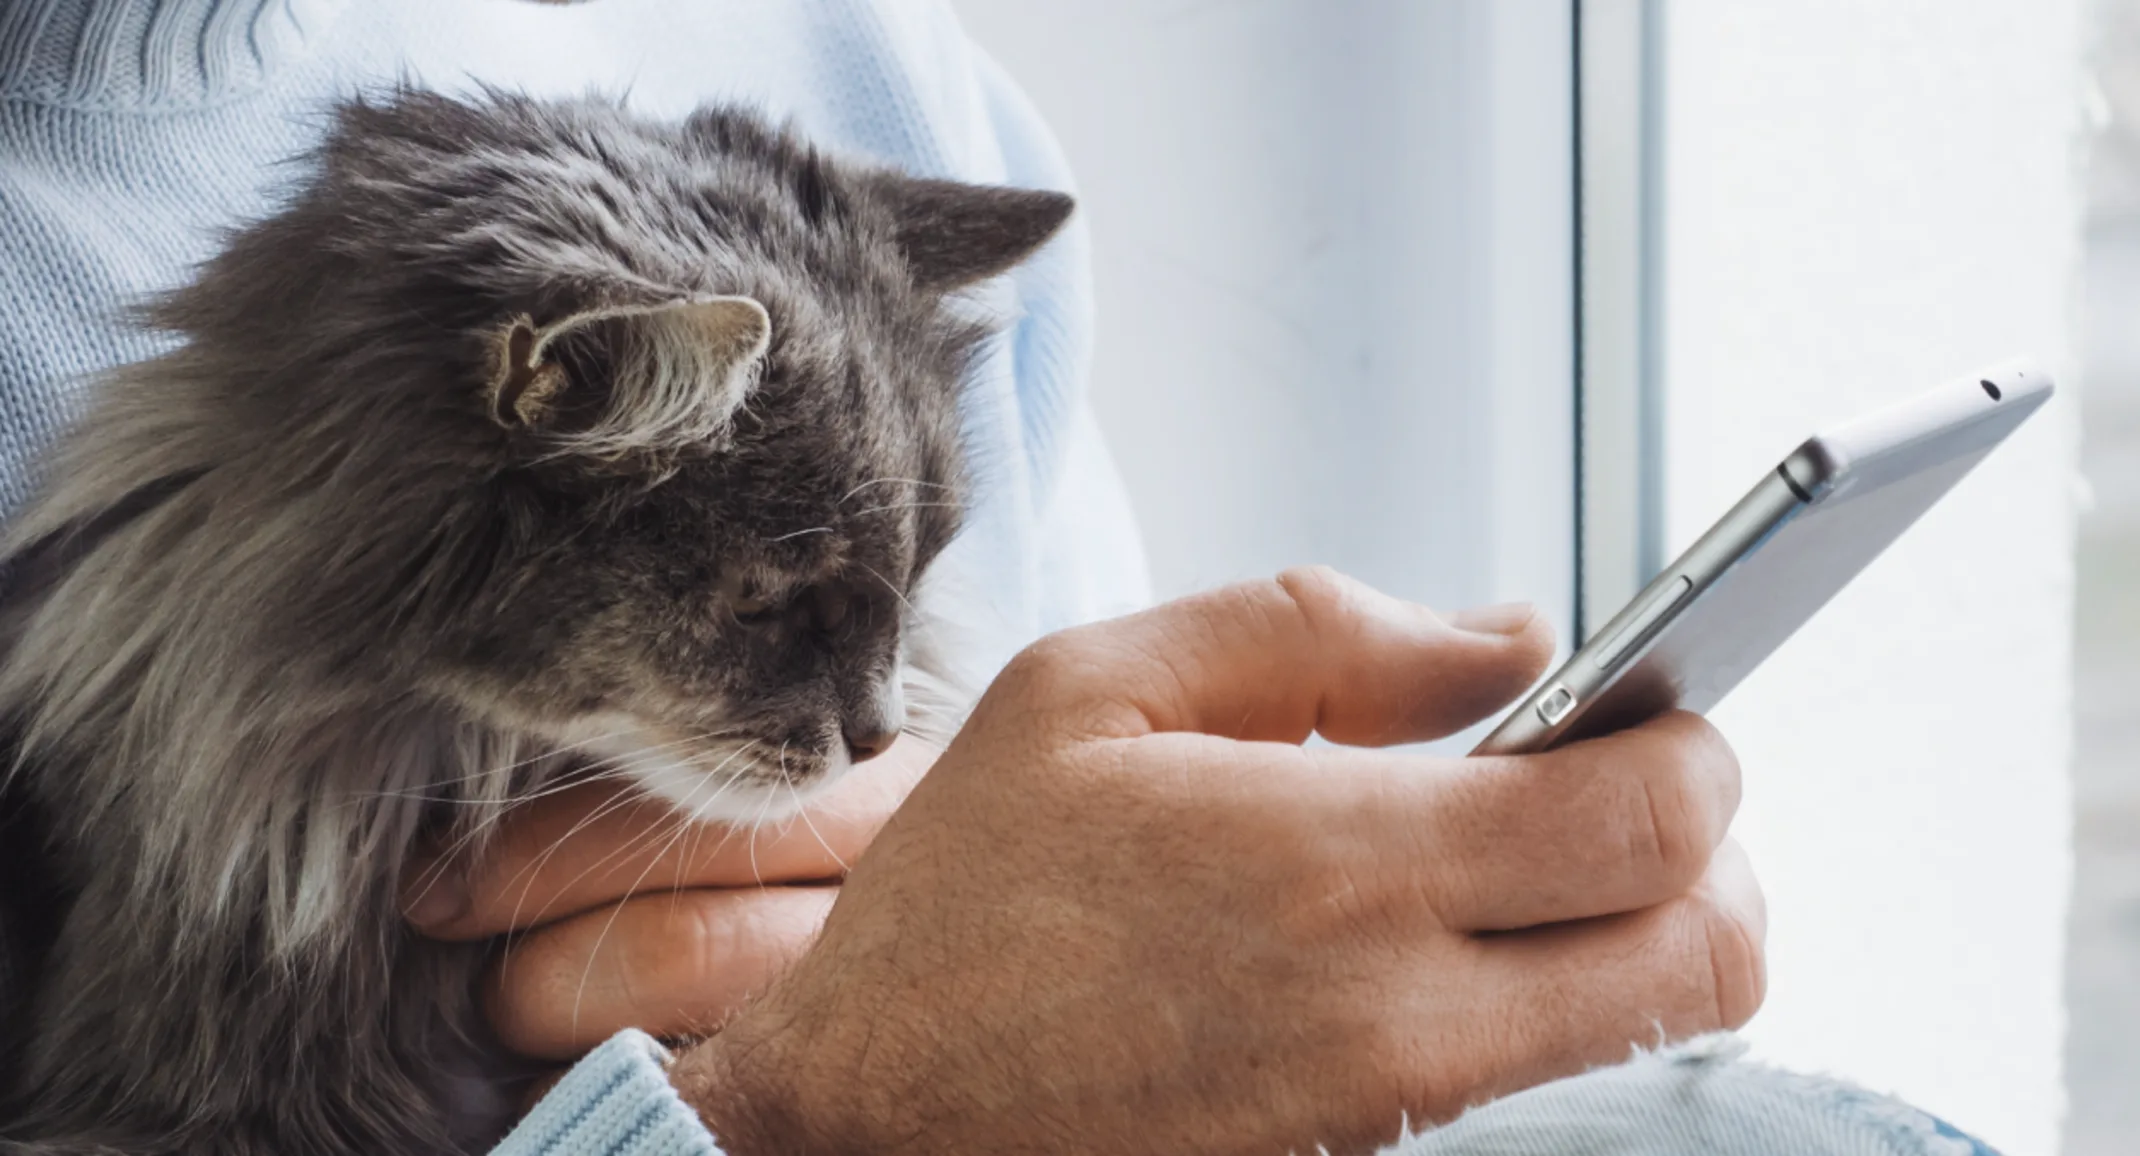 A man holding a phone and his cat